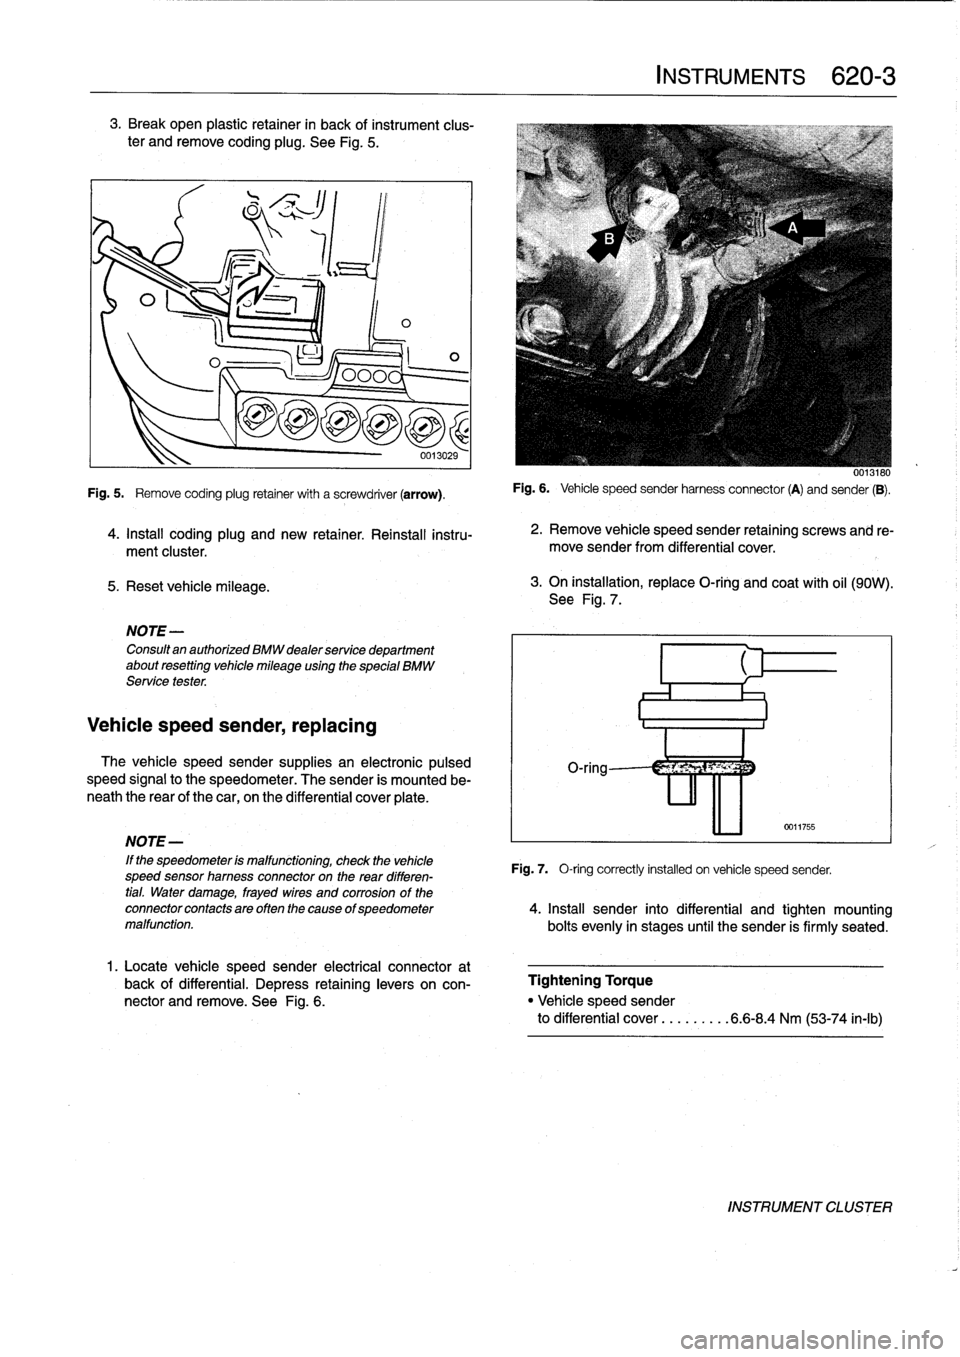 BMW 325i 1996 E36 Workshop Manual 3
.
Break
open
plastic
retainer
in
back
of
instrument
clus-
ter
andremove
coding
plug
.
See
Fig
.
5
.

5
.
Reset
vehicle
mileage
.

1
ILO

NOTE-

Consultan
authorized
BMW
dealer
service
department
abo